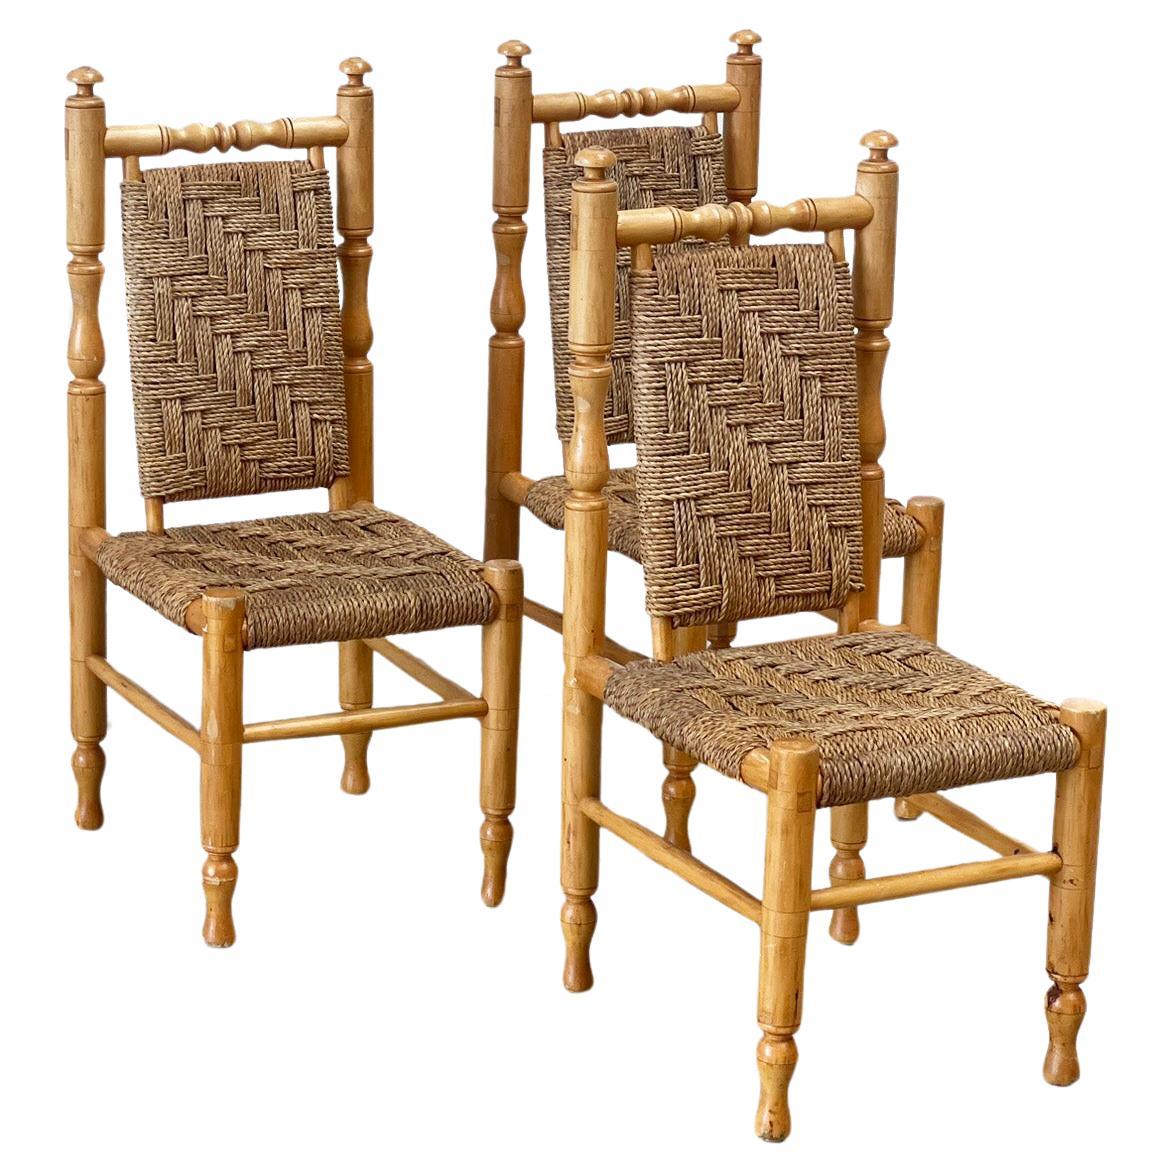 set of 3 sidechairs / dining chairs by by Adrien Audoux & Frida Minet For Sale